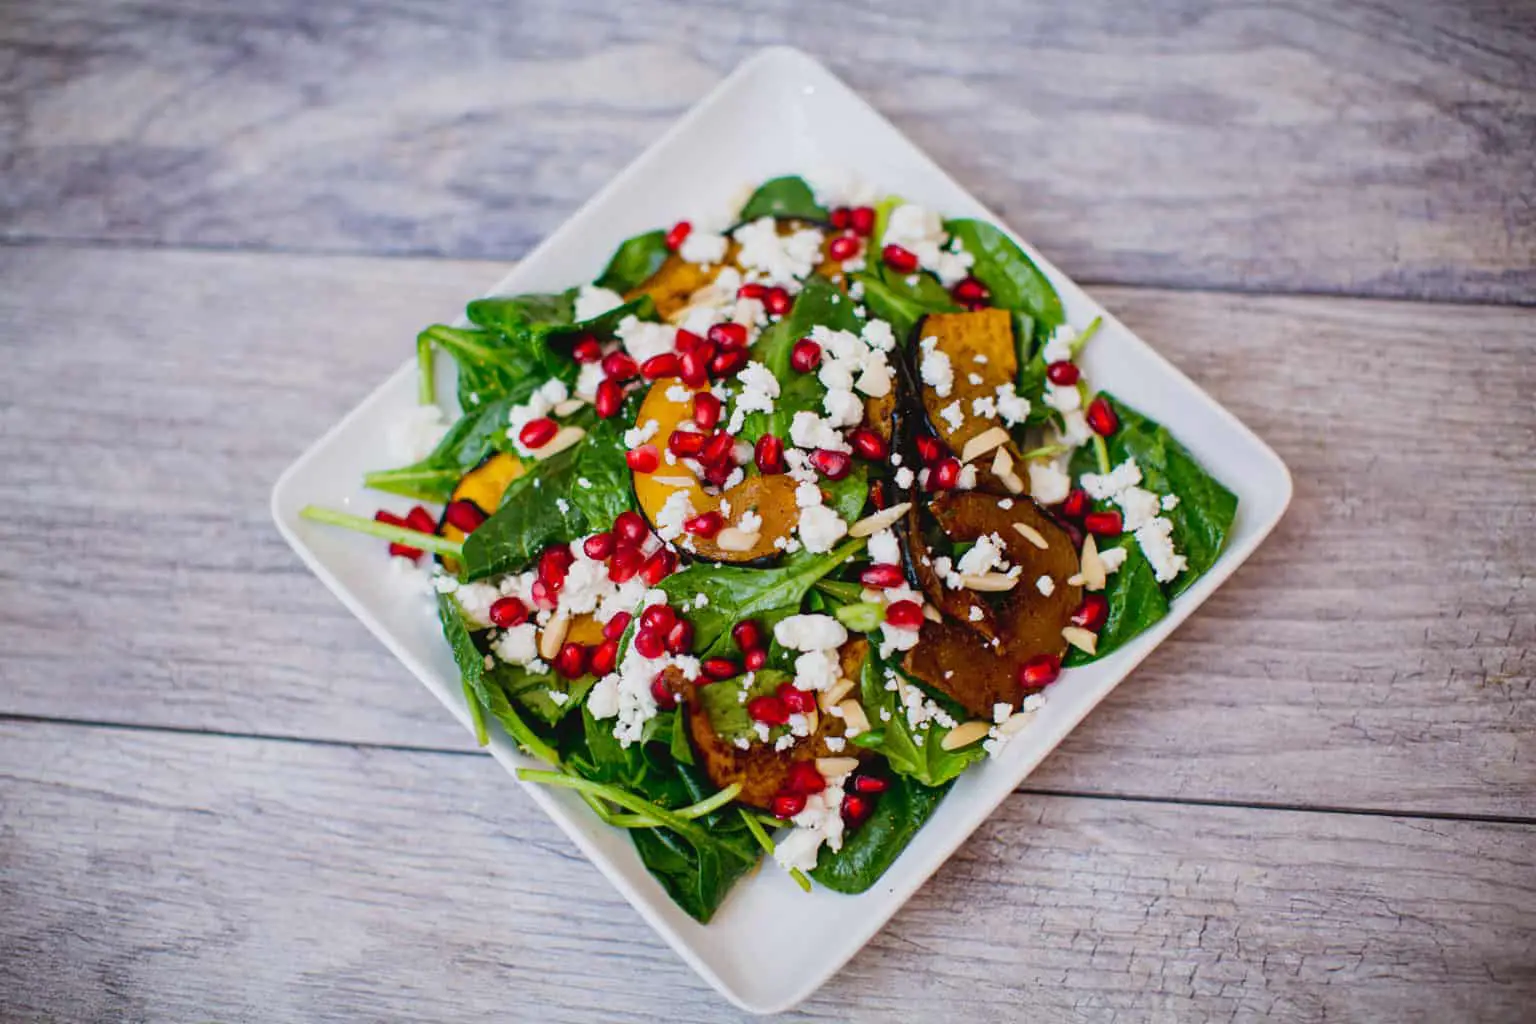 Roasted acorn squash and pomegranate spinach salad recipe in a white plate